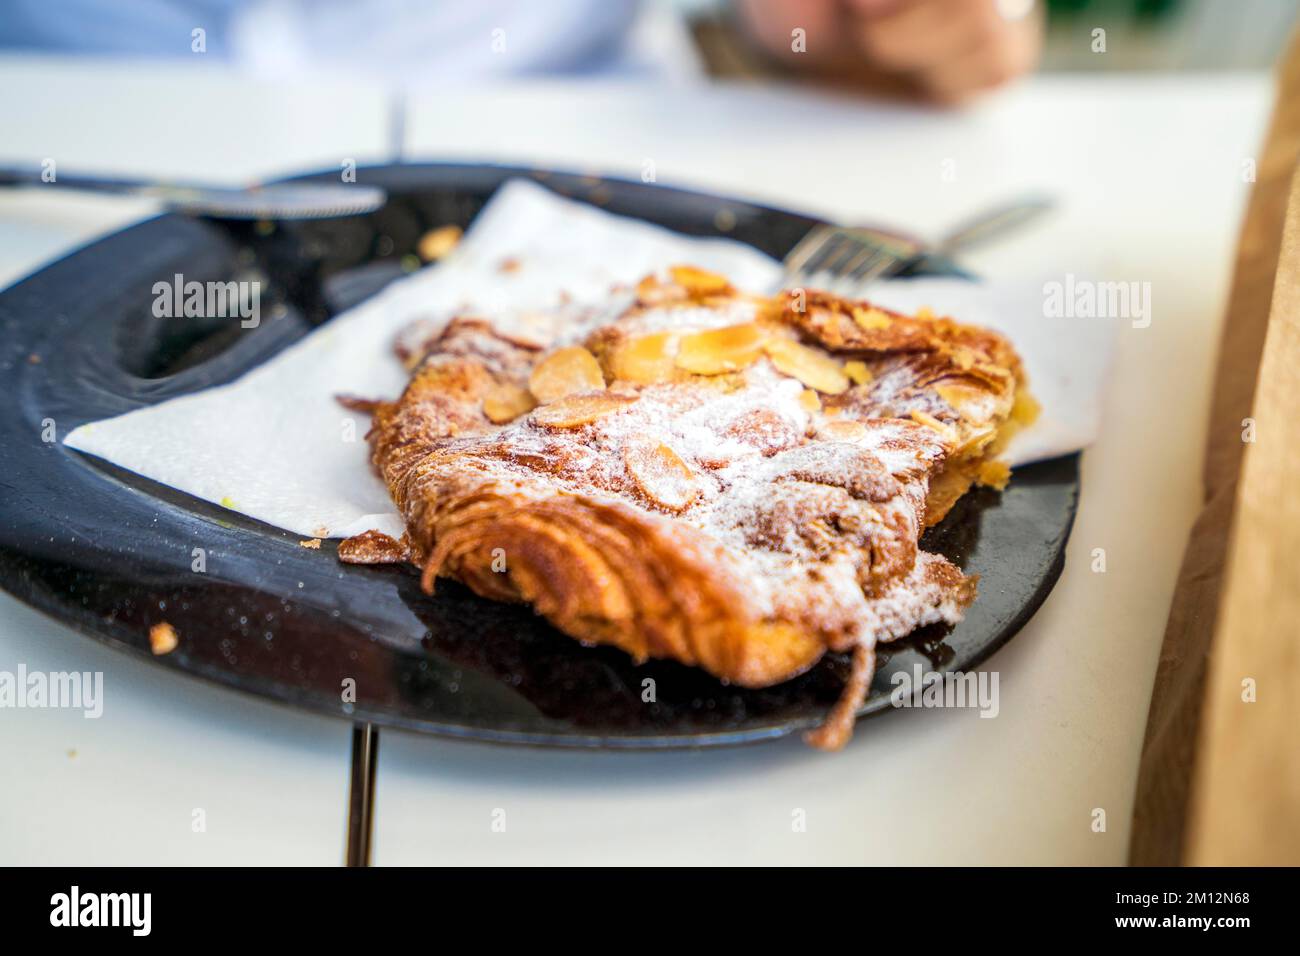 A sweet tasty pastry with almonds from Canary Islands, Spain, Europe Stock Photo